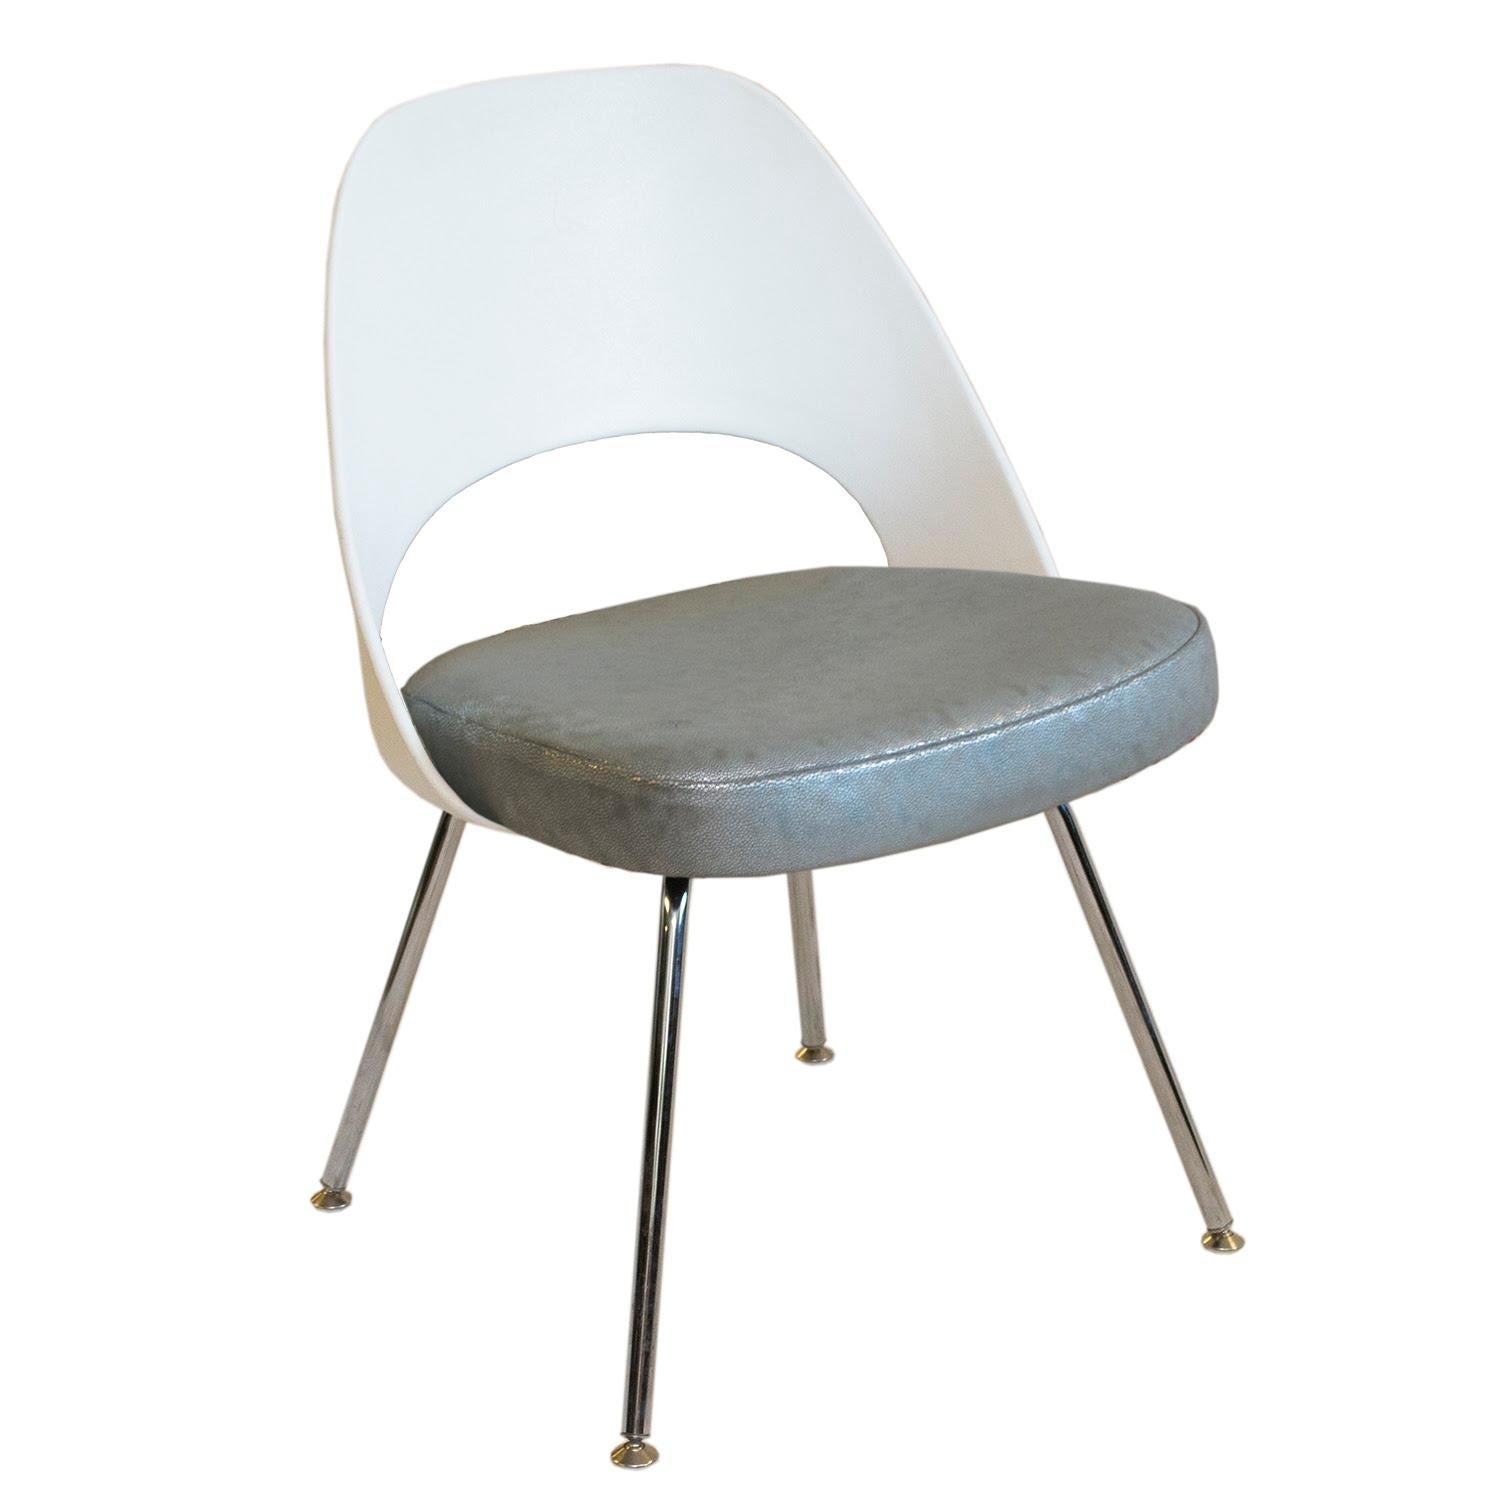 Out of this world! This white-plastic back Eero Saarinen for Knoll side chair was recently reupholstered in an incredibly supple beaded silver leather. This chair would be awesome in a space-age theme child's room or as a set in a modern dining